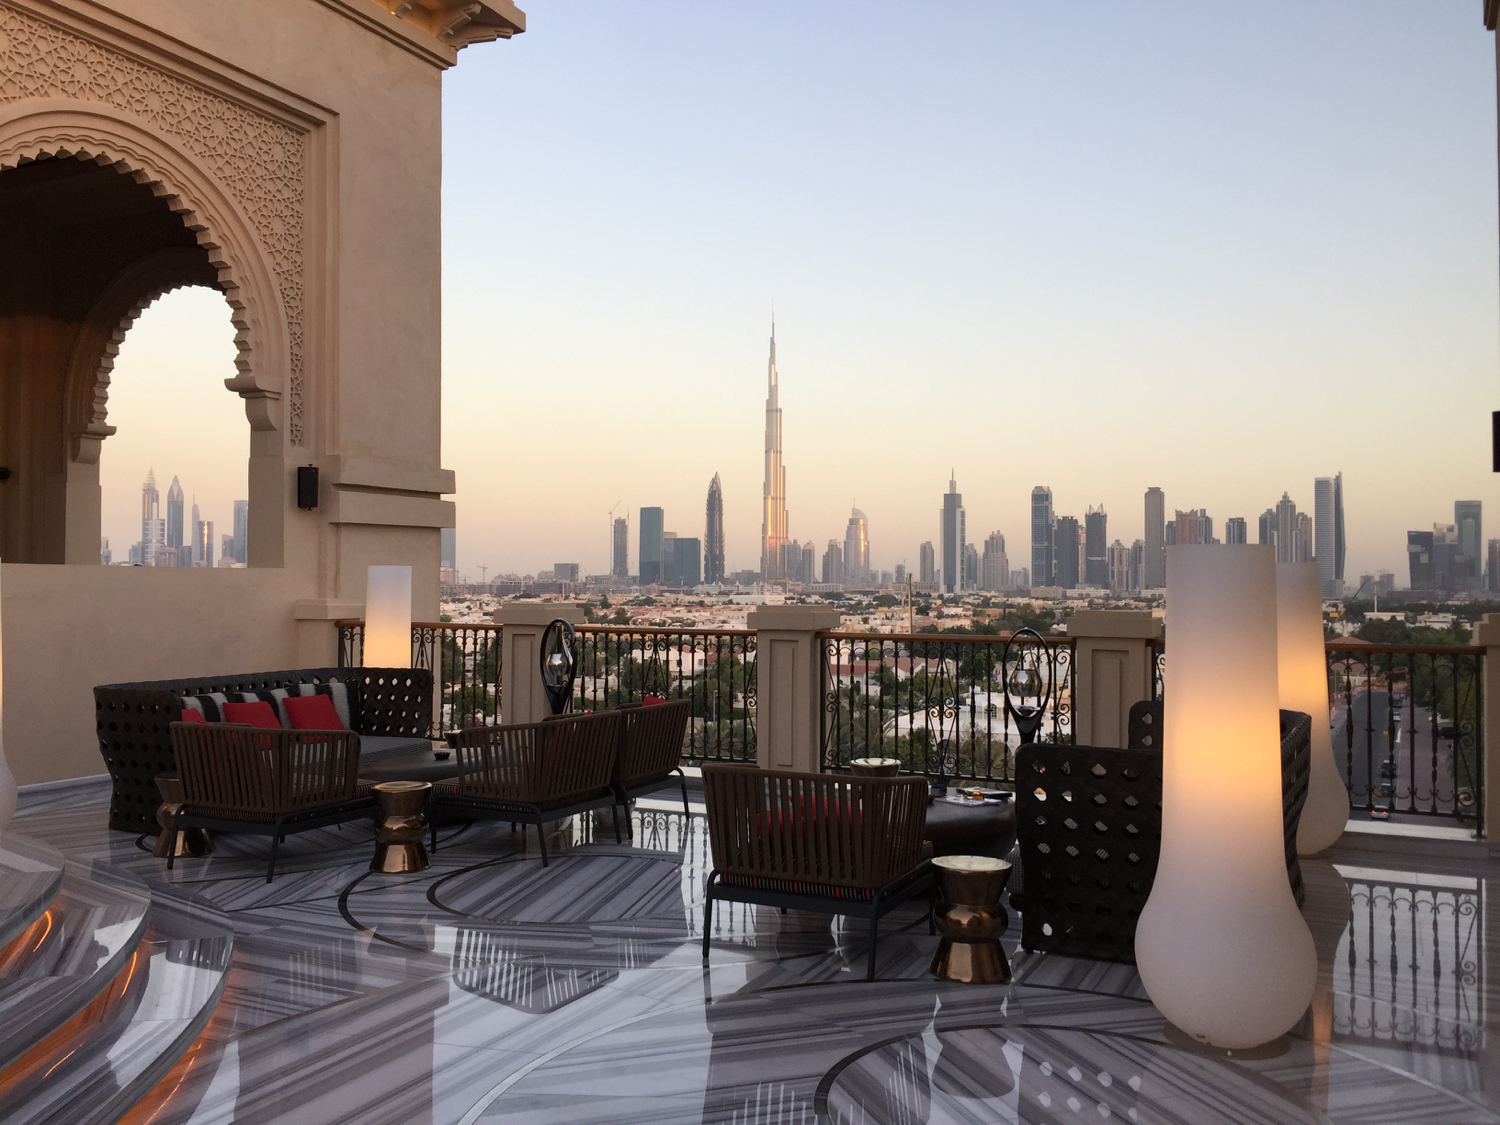 Mustsee One Of The Best Skyline Views In Dubai The Rooftop